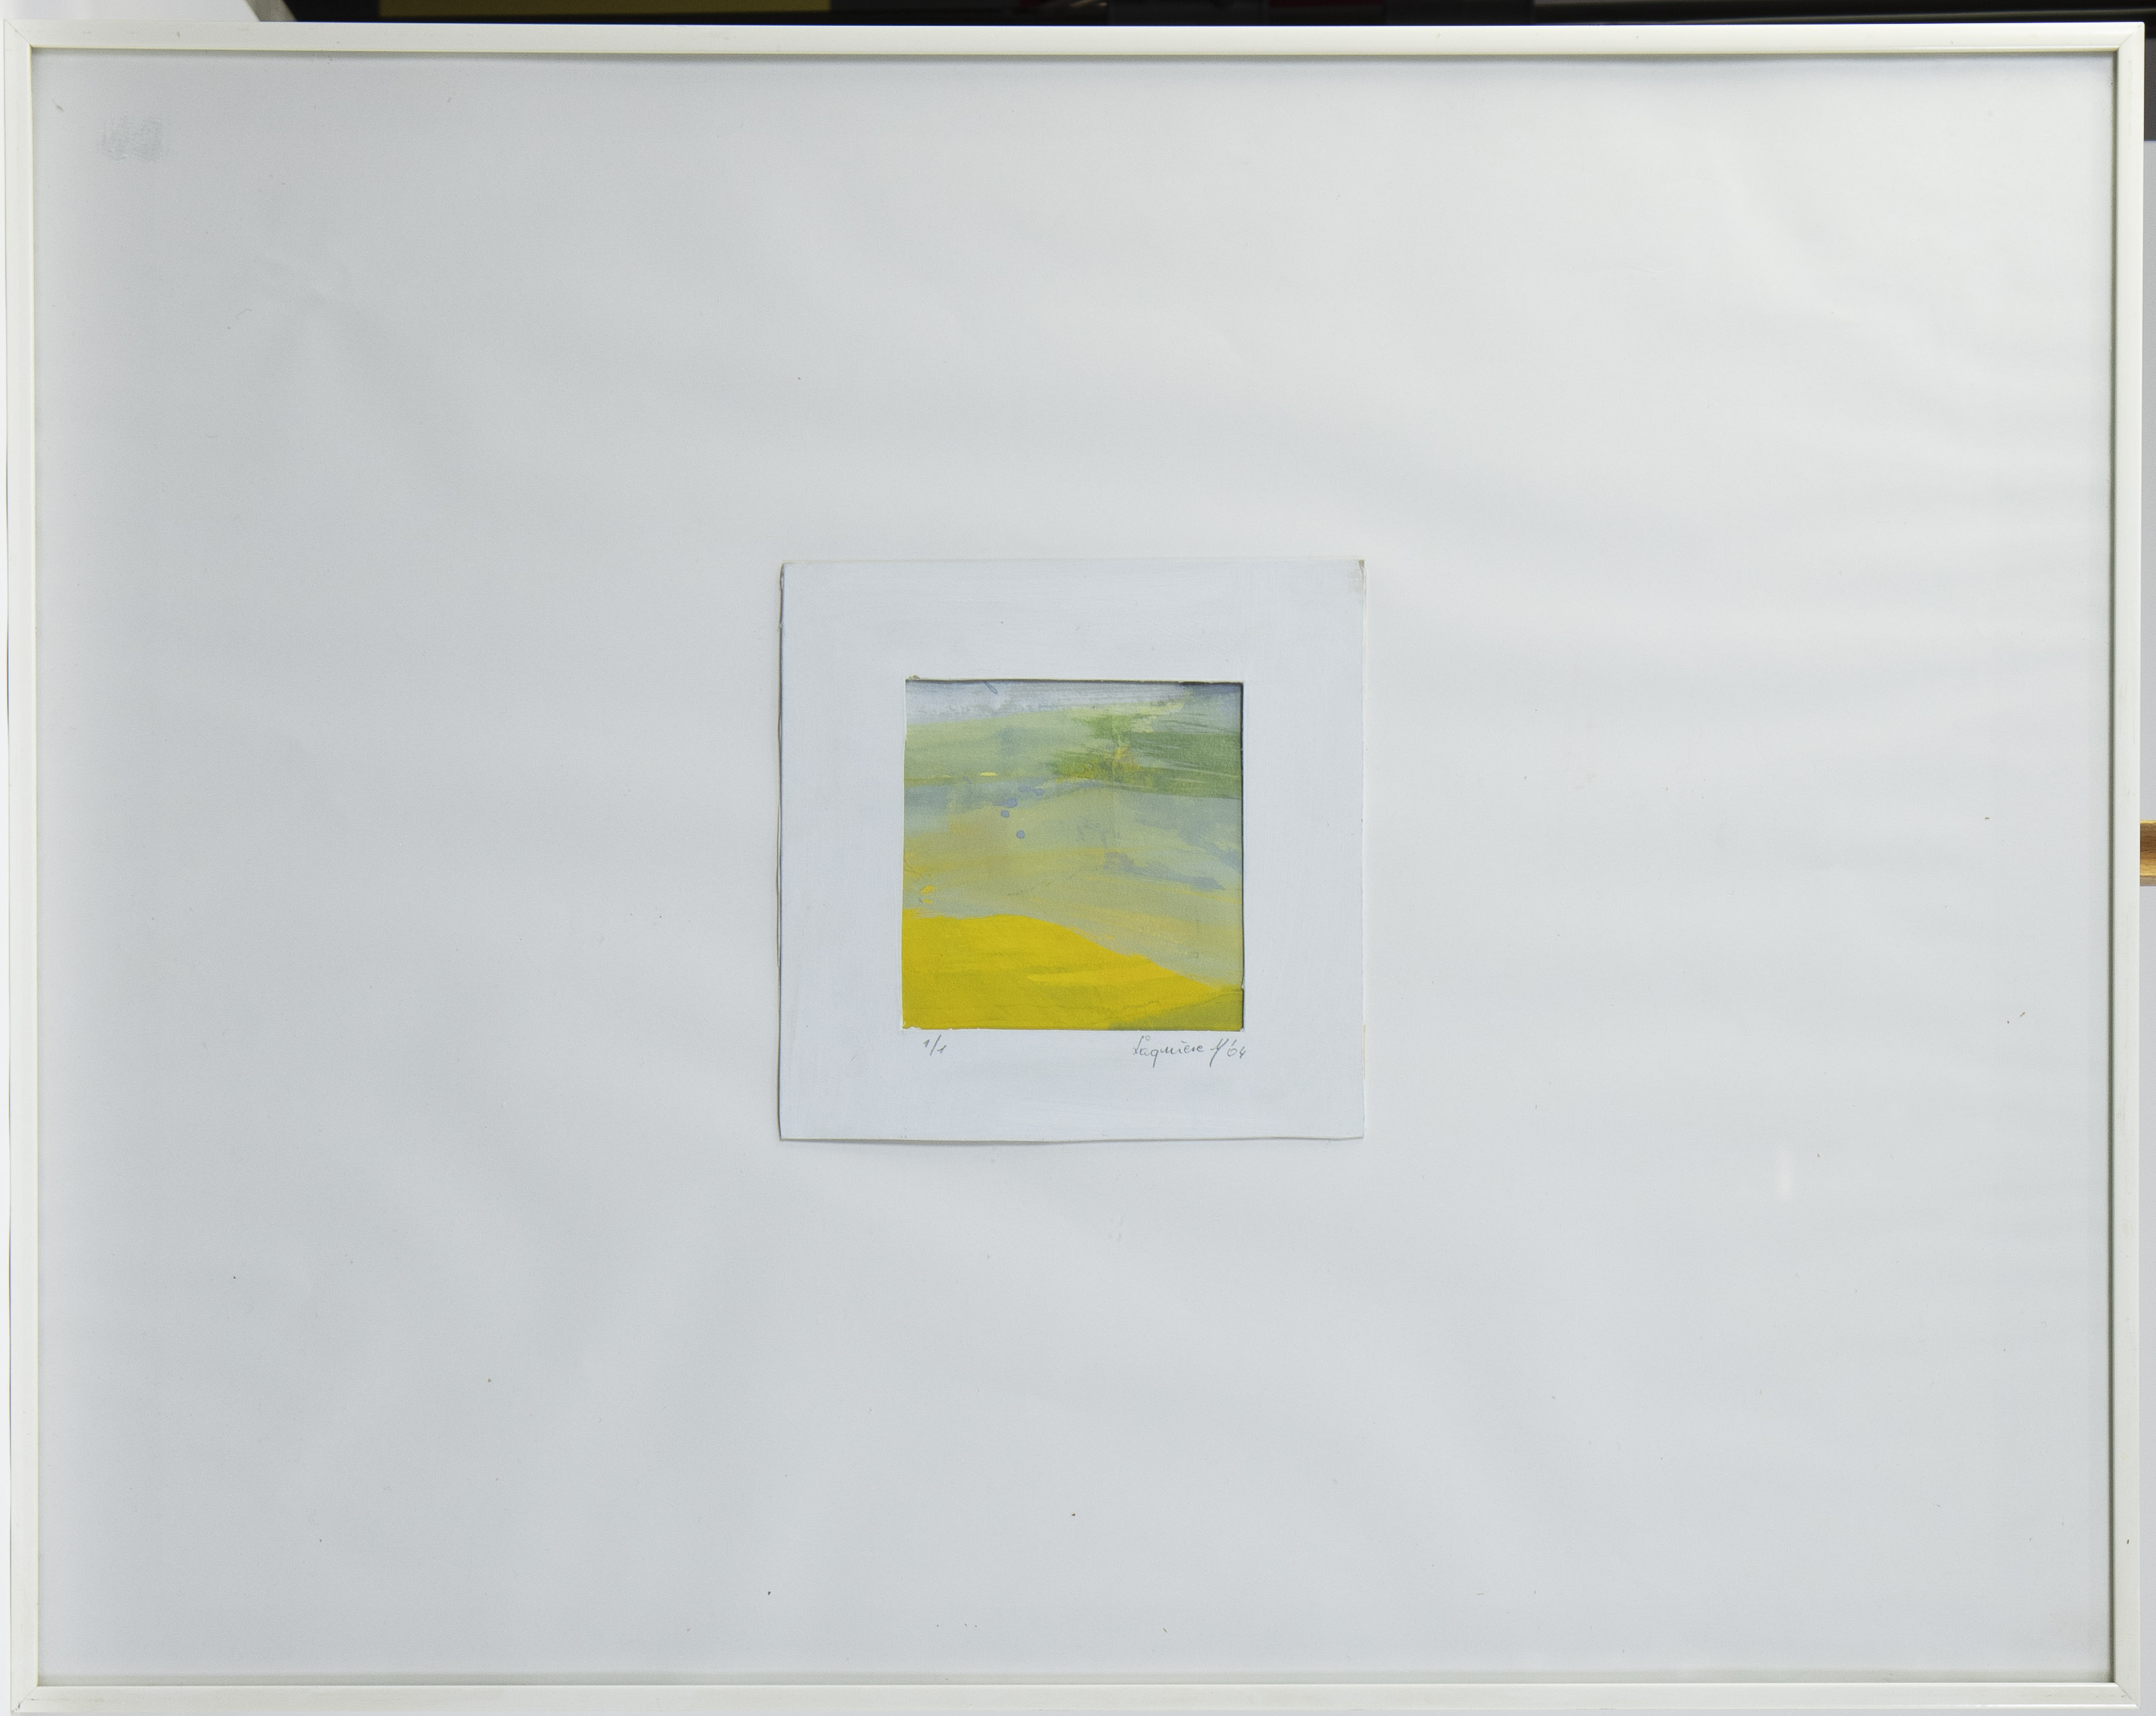 MARTINE LAQUIERE (Ghent), watercolour Untitled, 1/1, signed and dated 2004 - Image 2 of 4